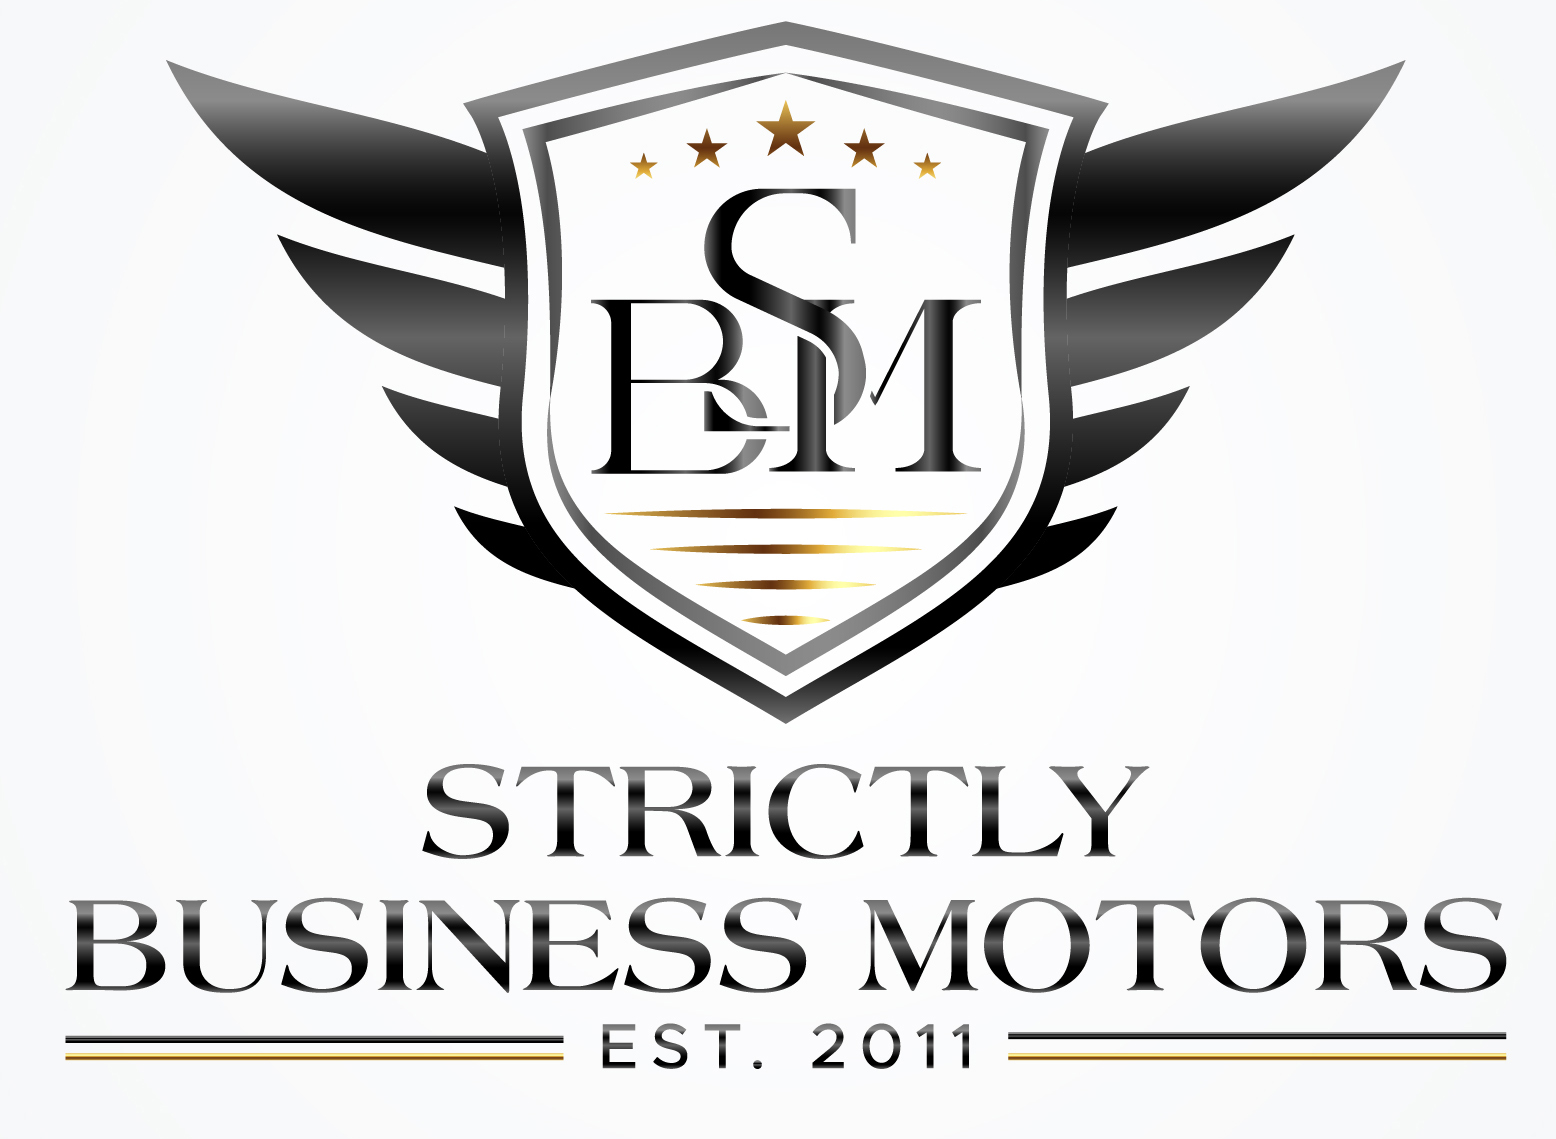 Strictly Business Motors Inc